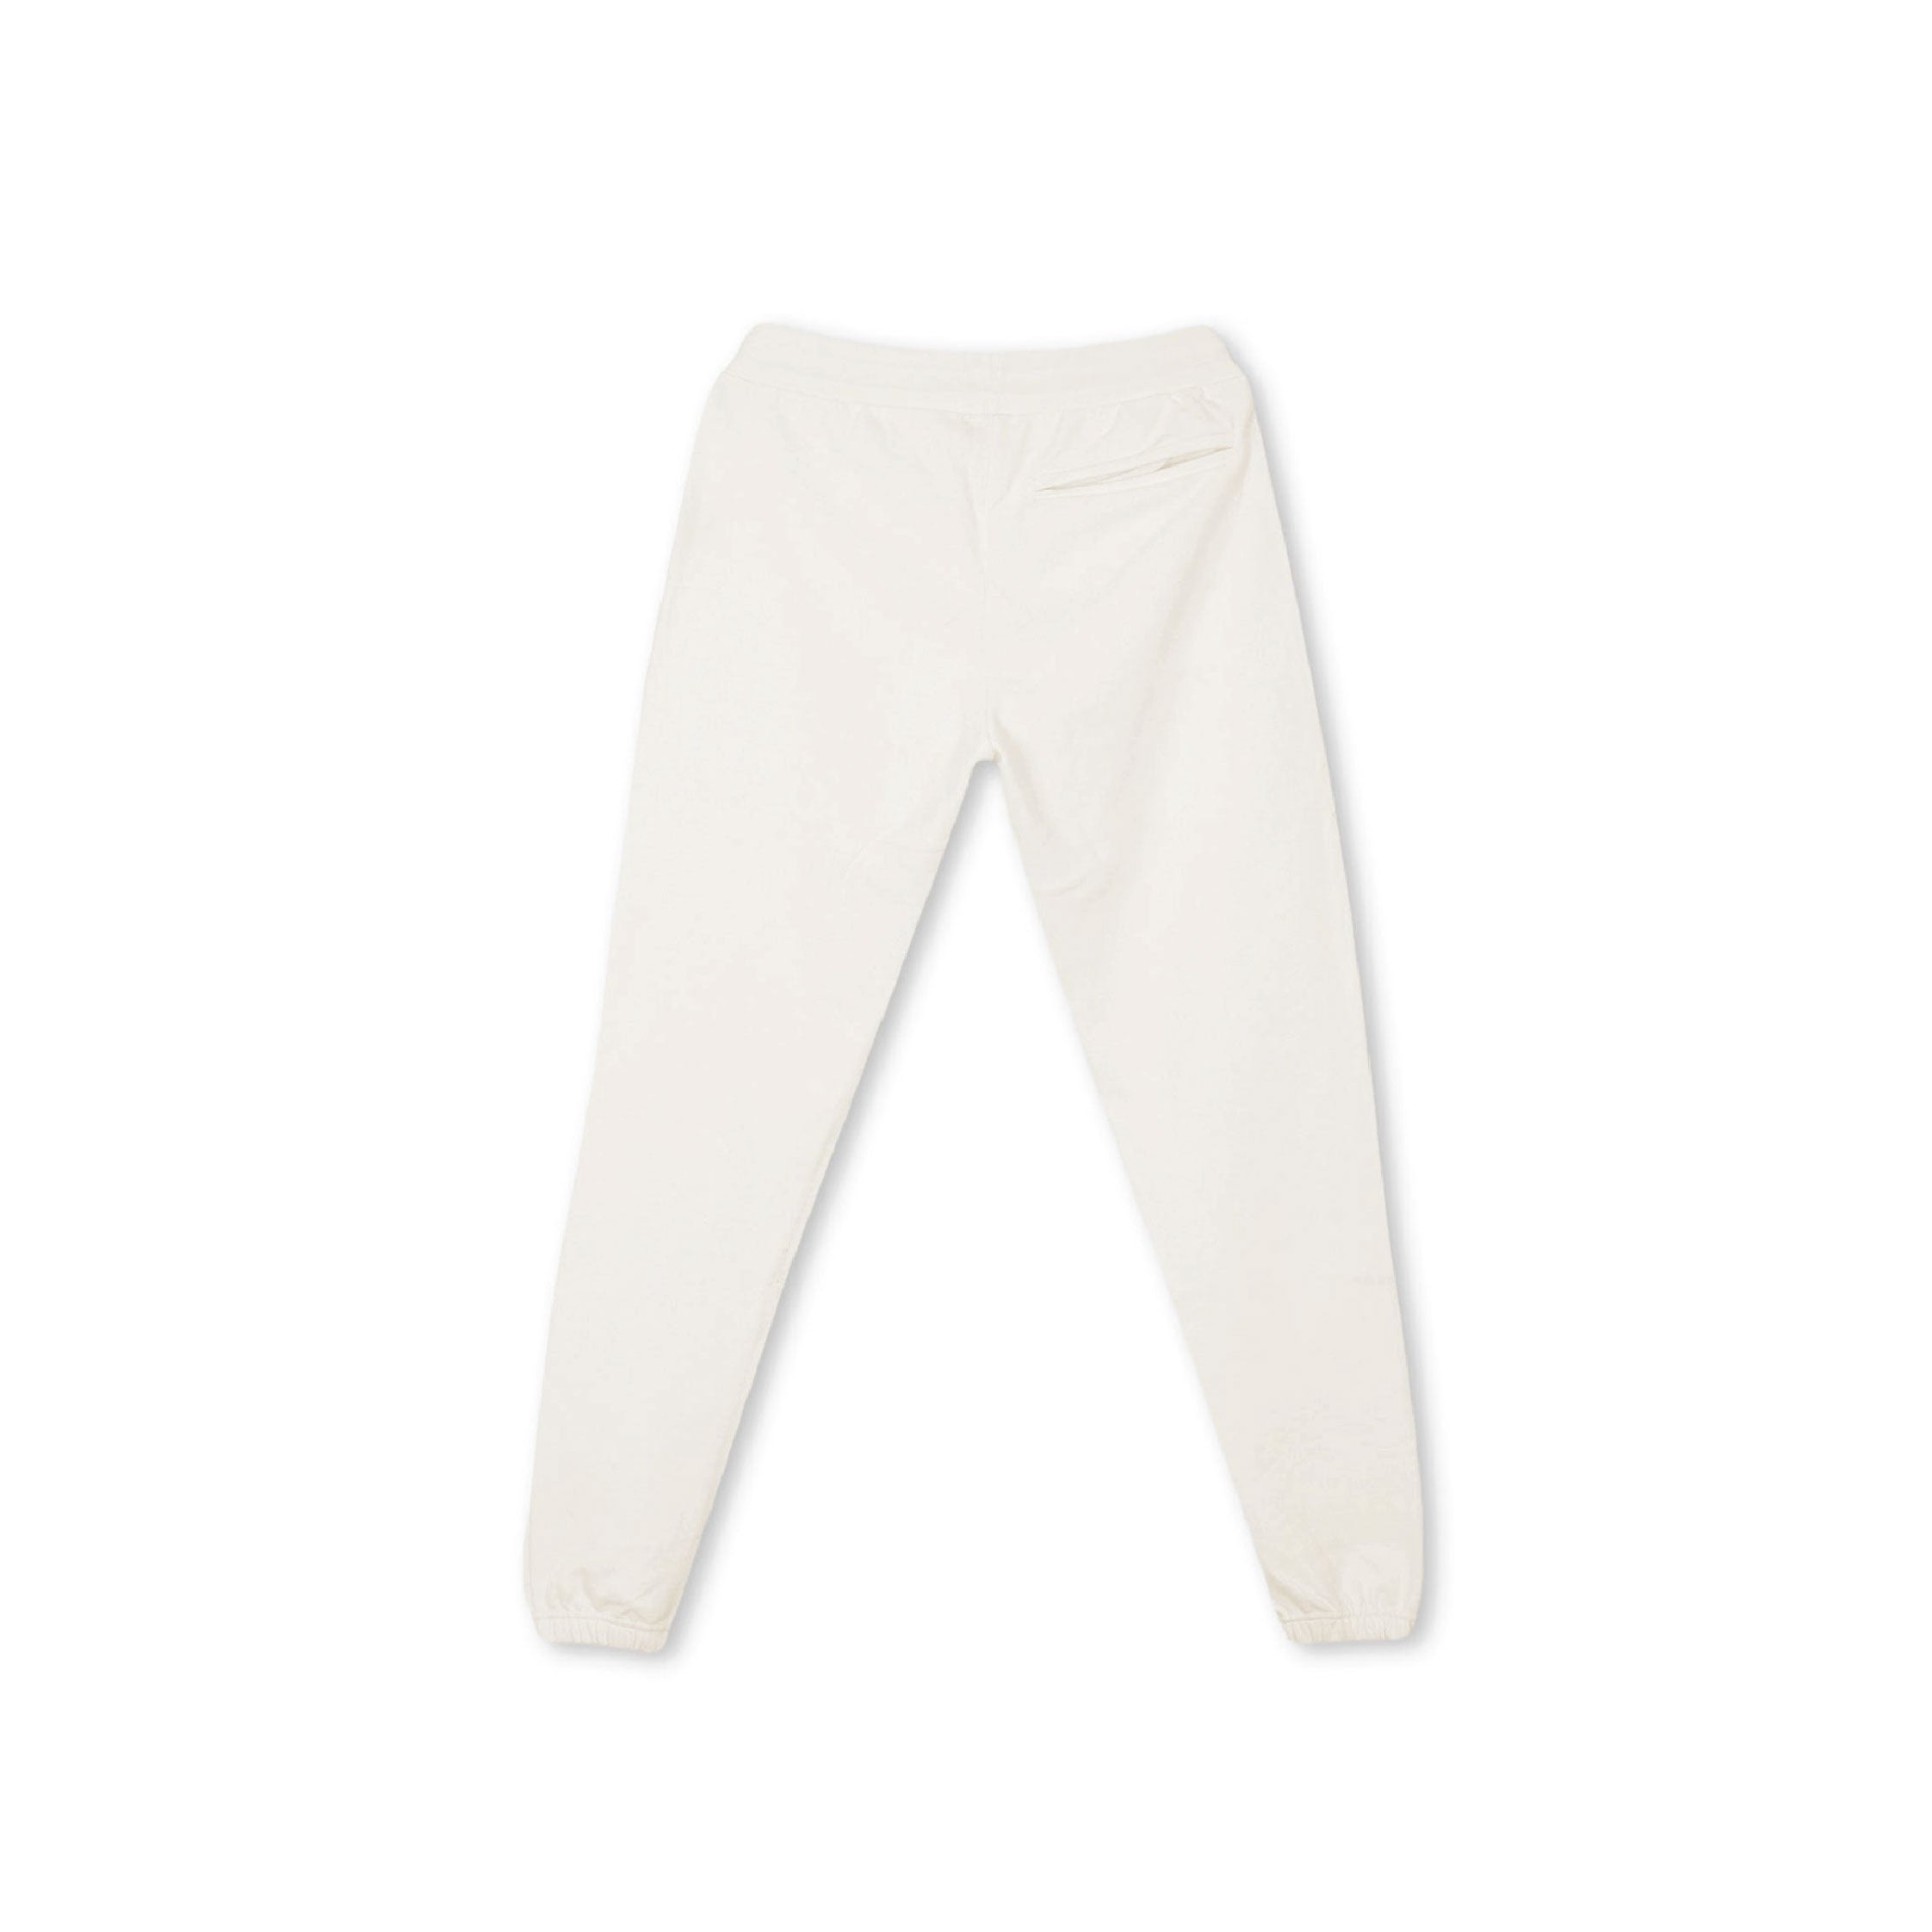 ESTATE OF MIND FRENCH TERRY SWEATPANTS - VICTORY - VINTAGE WHITE